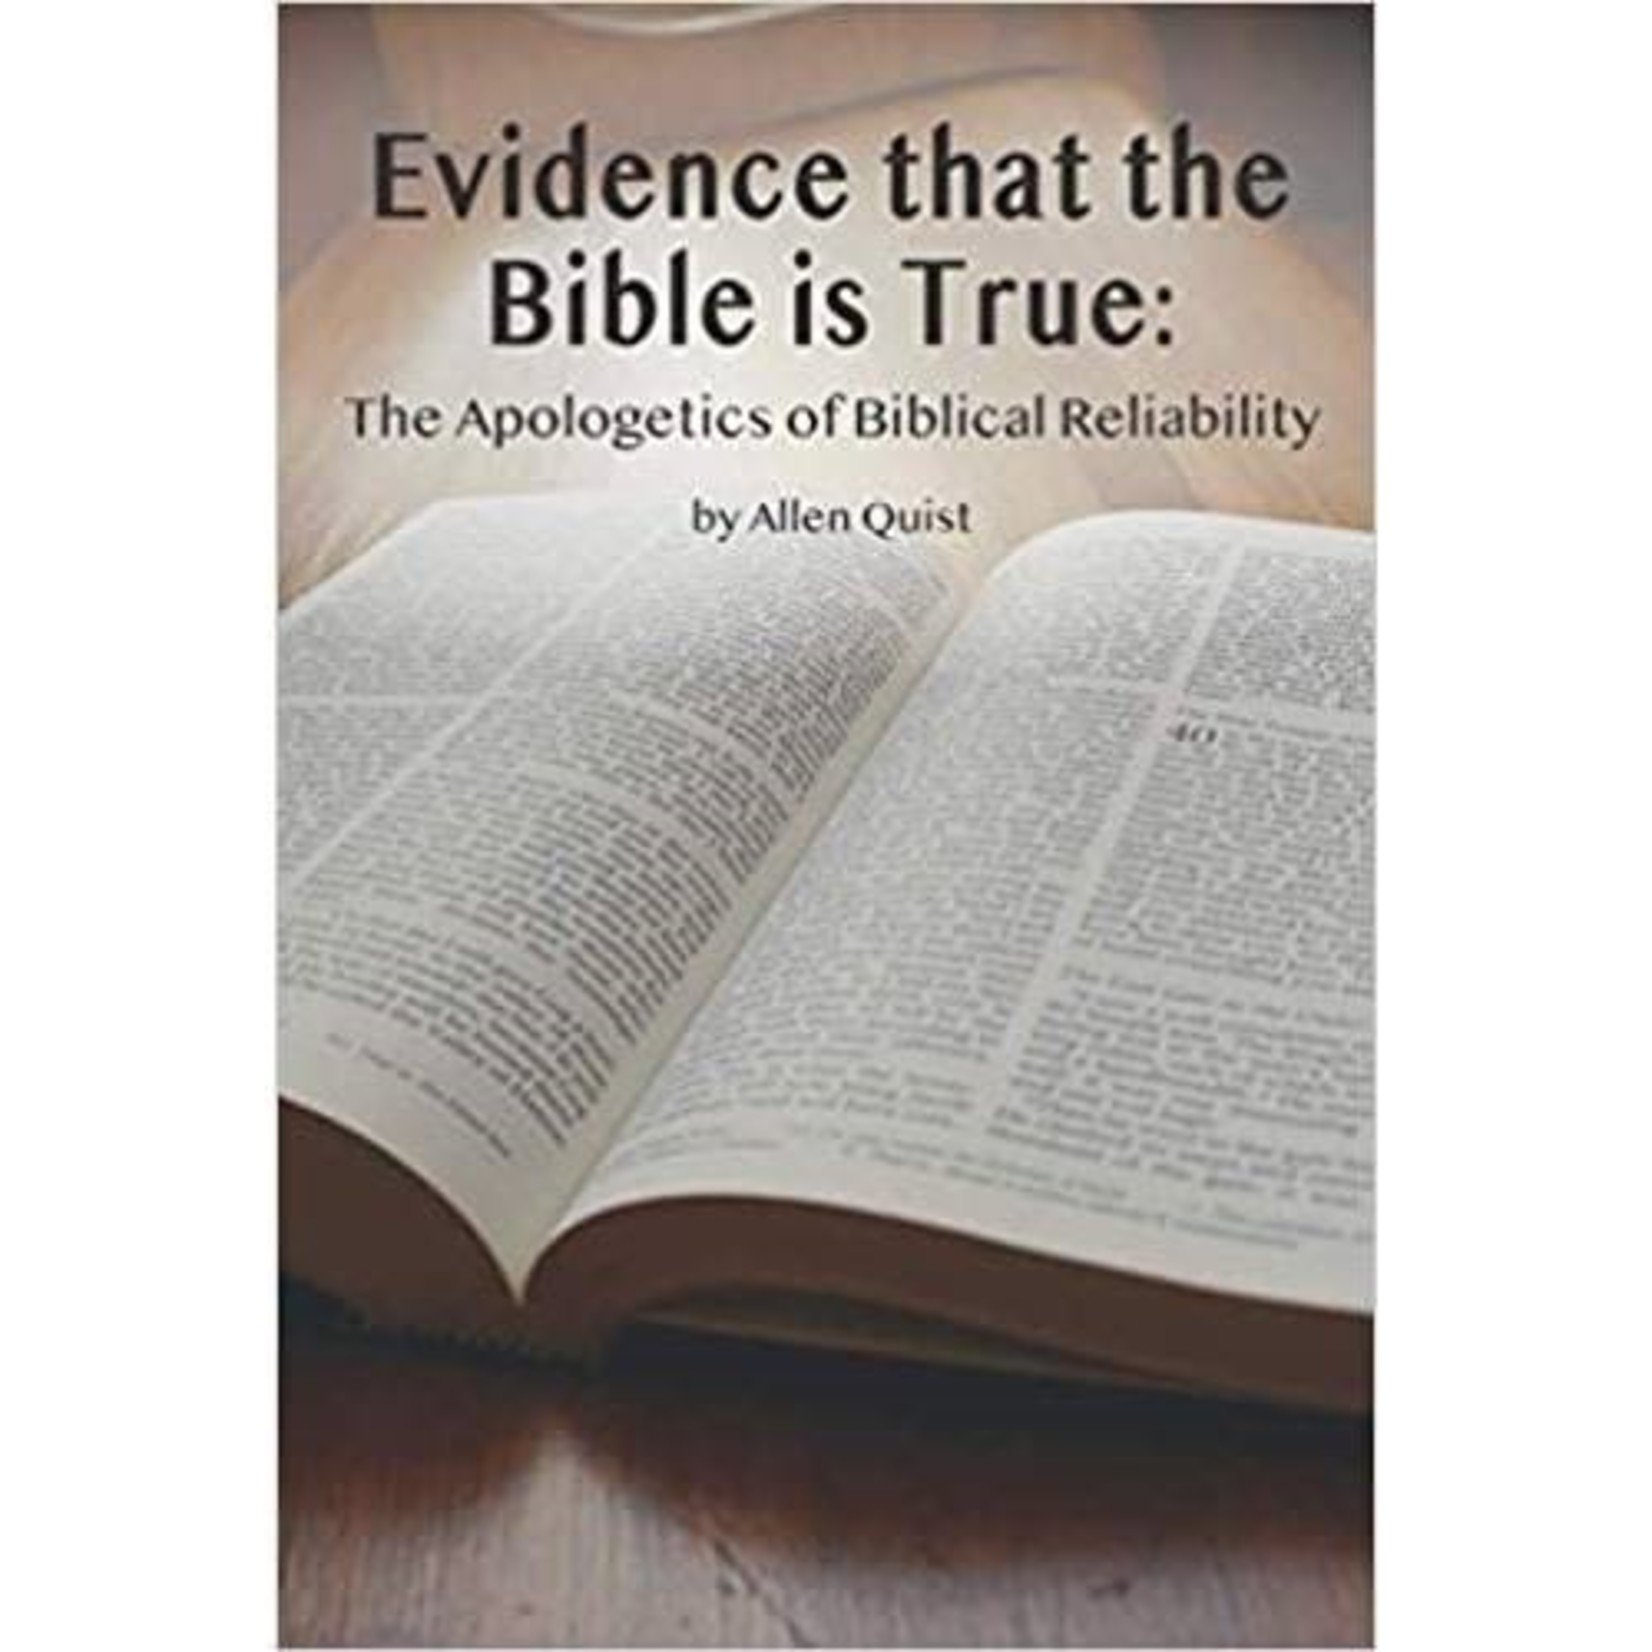 Evidence that the Bible is True: The Apologetics of Biblical Reliability